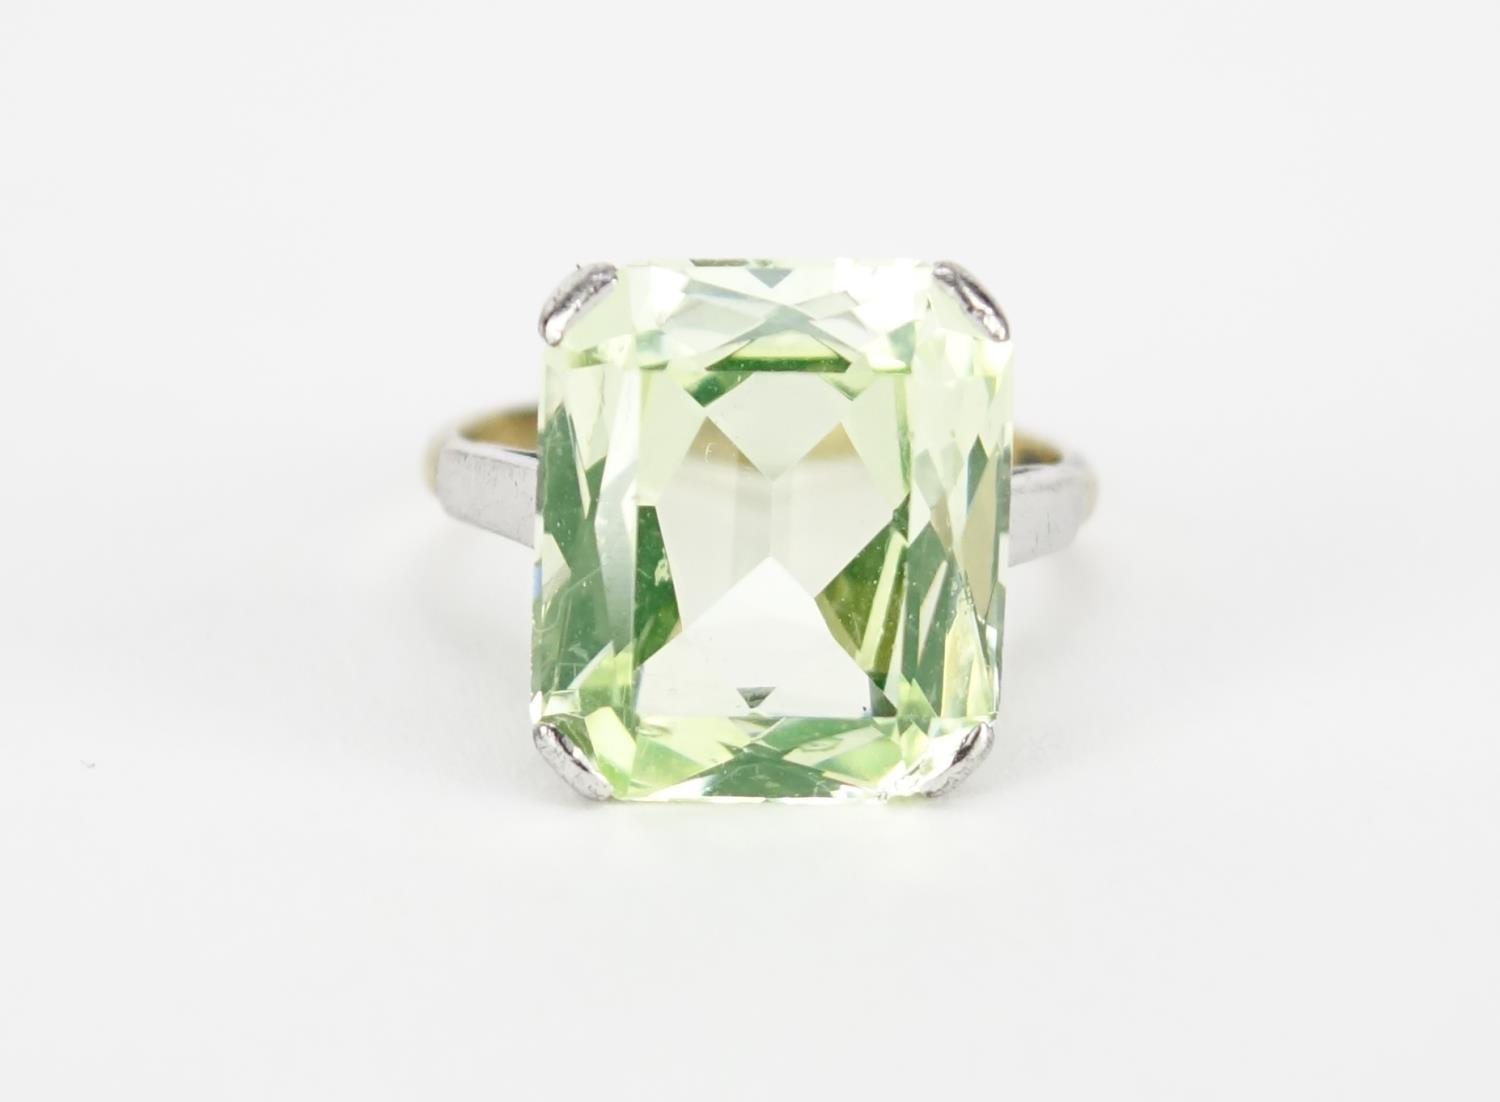 9ct gold green stone ring, size L, 4.5g :For Further Condition Reports Please Visit Our Website. - Image 2 of 8